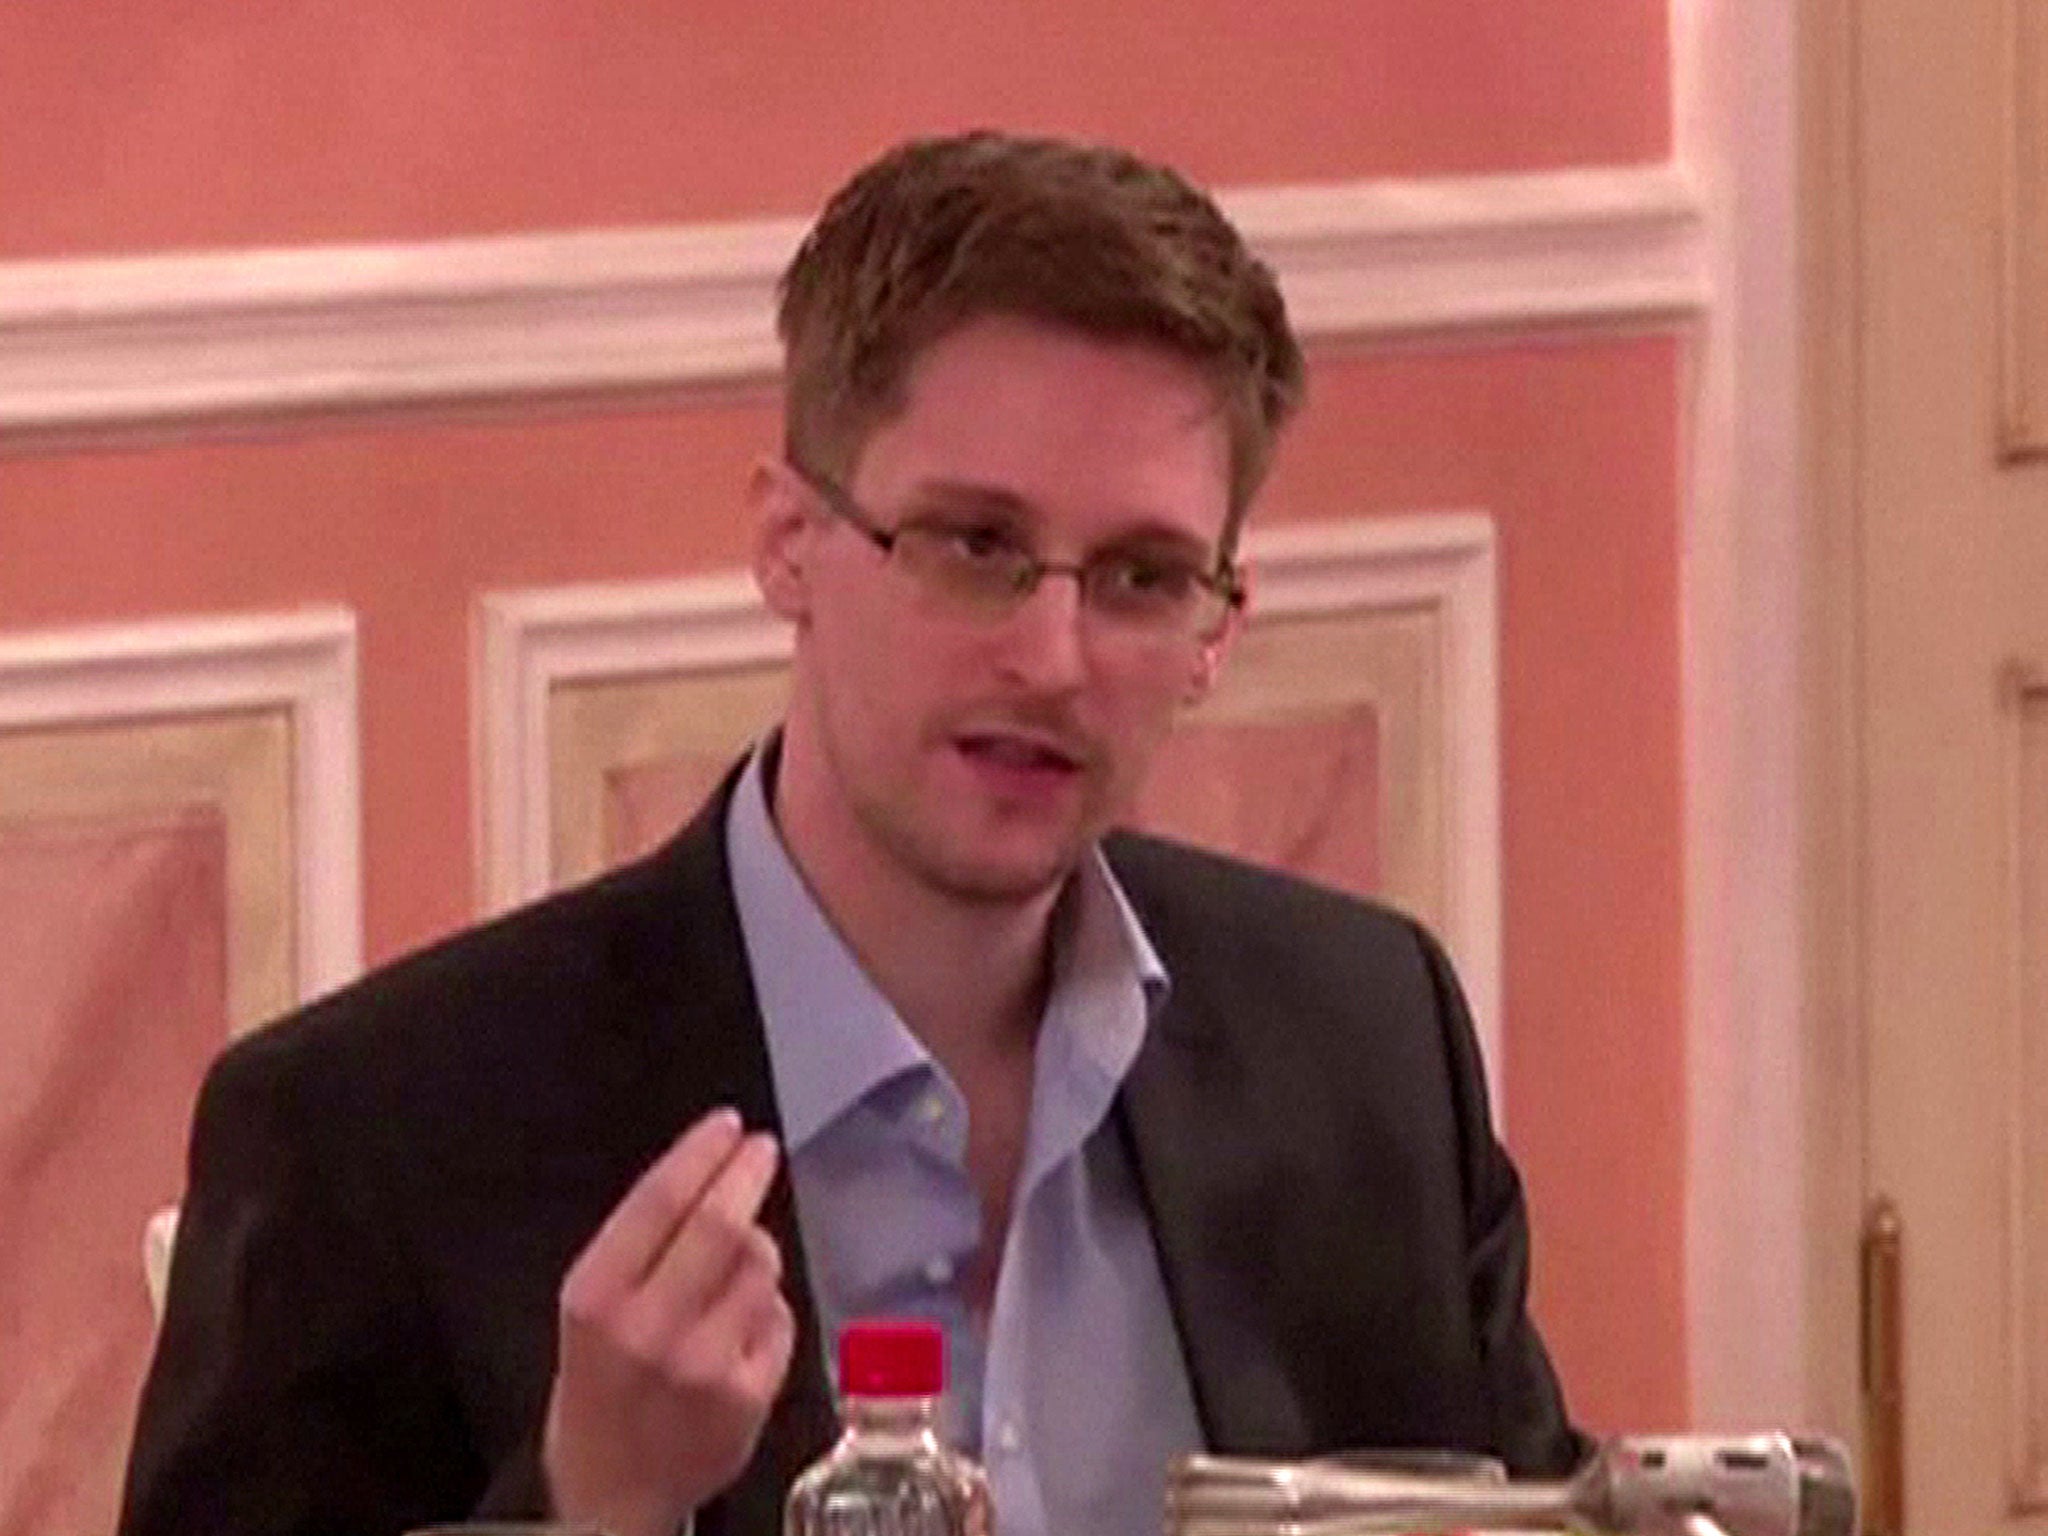 Edward Snowden speaking during his dinner with a group of four retired US ex-intelligence workers and activists at a luxurious room in an unidentified location.